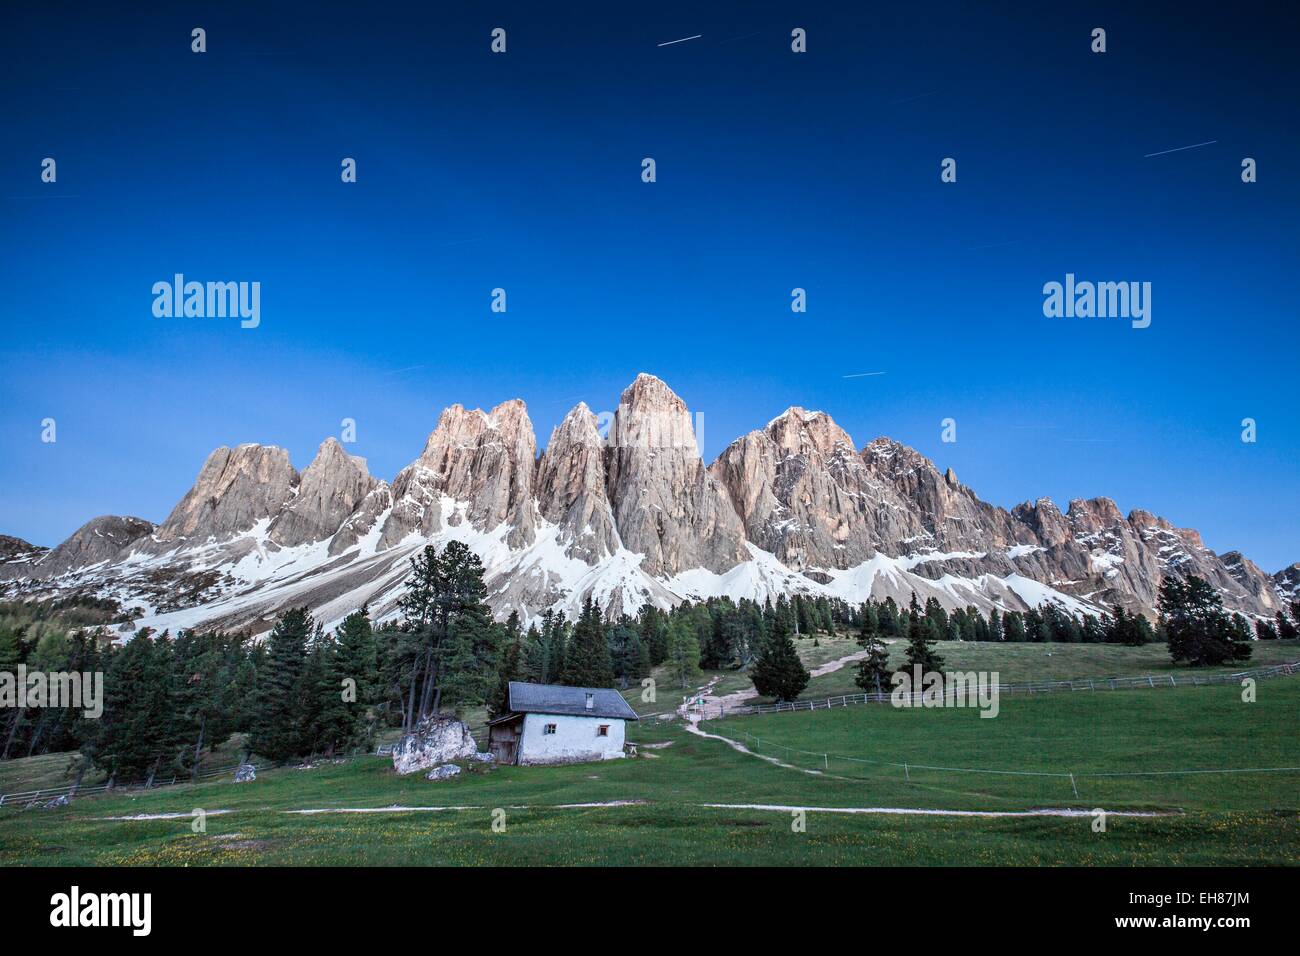 Evening view of the massif of the Odle-Villnoss in the Odle-Puez Nature Park, South Tyrol, Italy, Europe Stock Photo